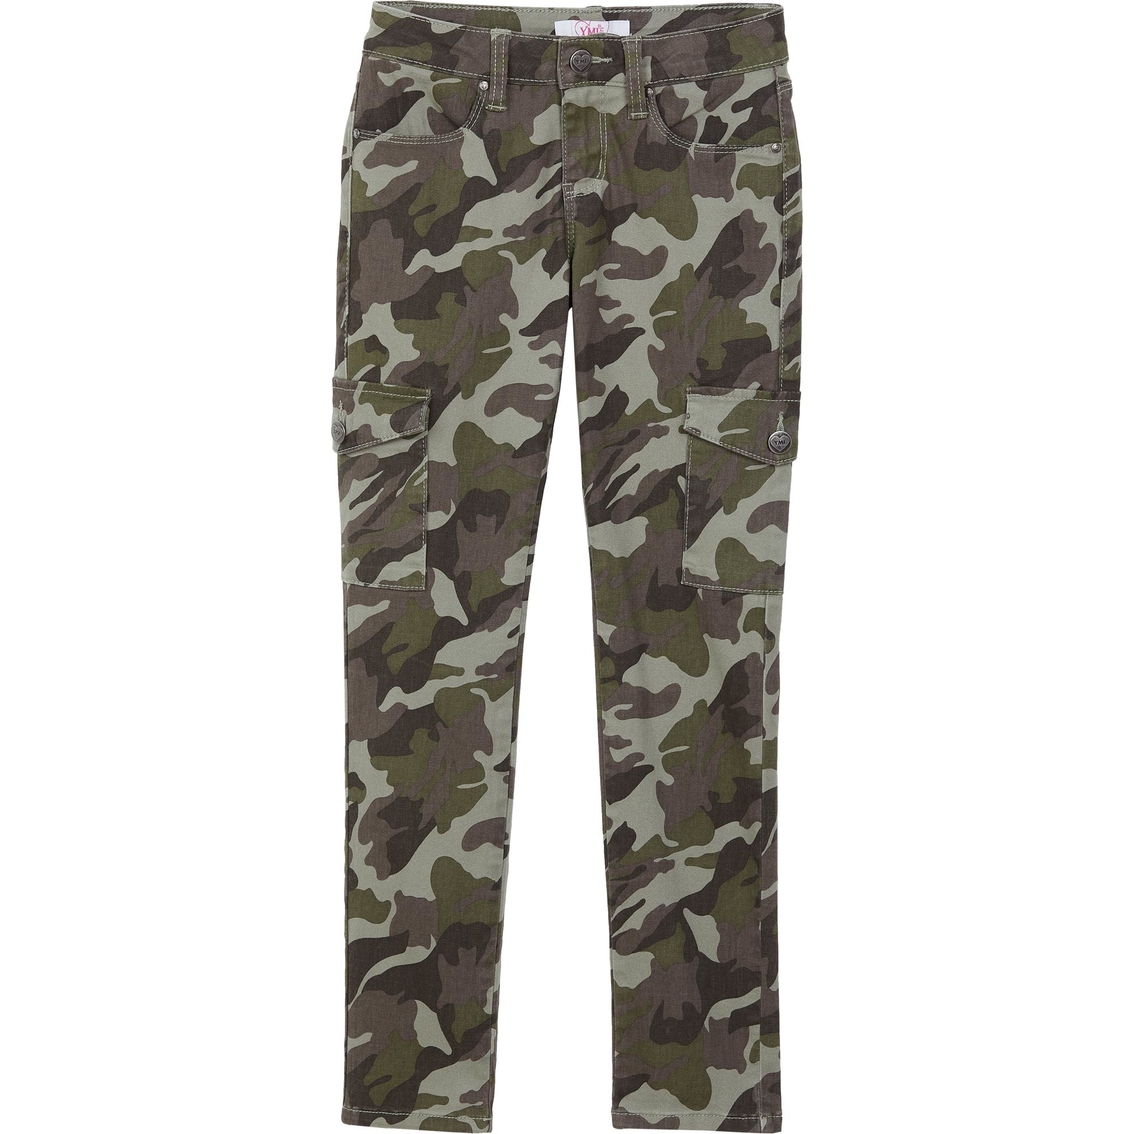 Ymi Jeans Girls 1 Button Cargo Pants | Girls 7-16 | Clothing ...